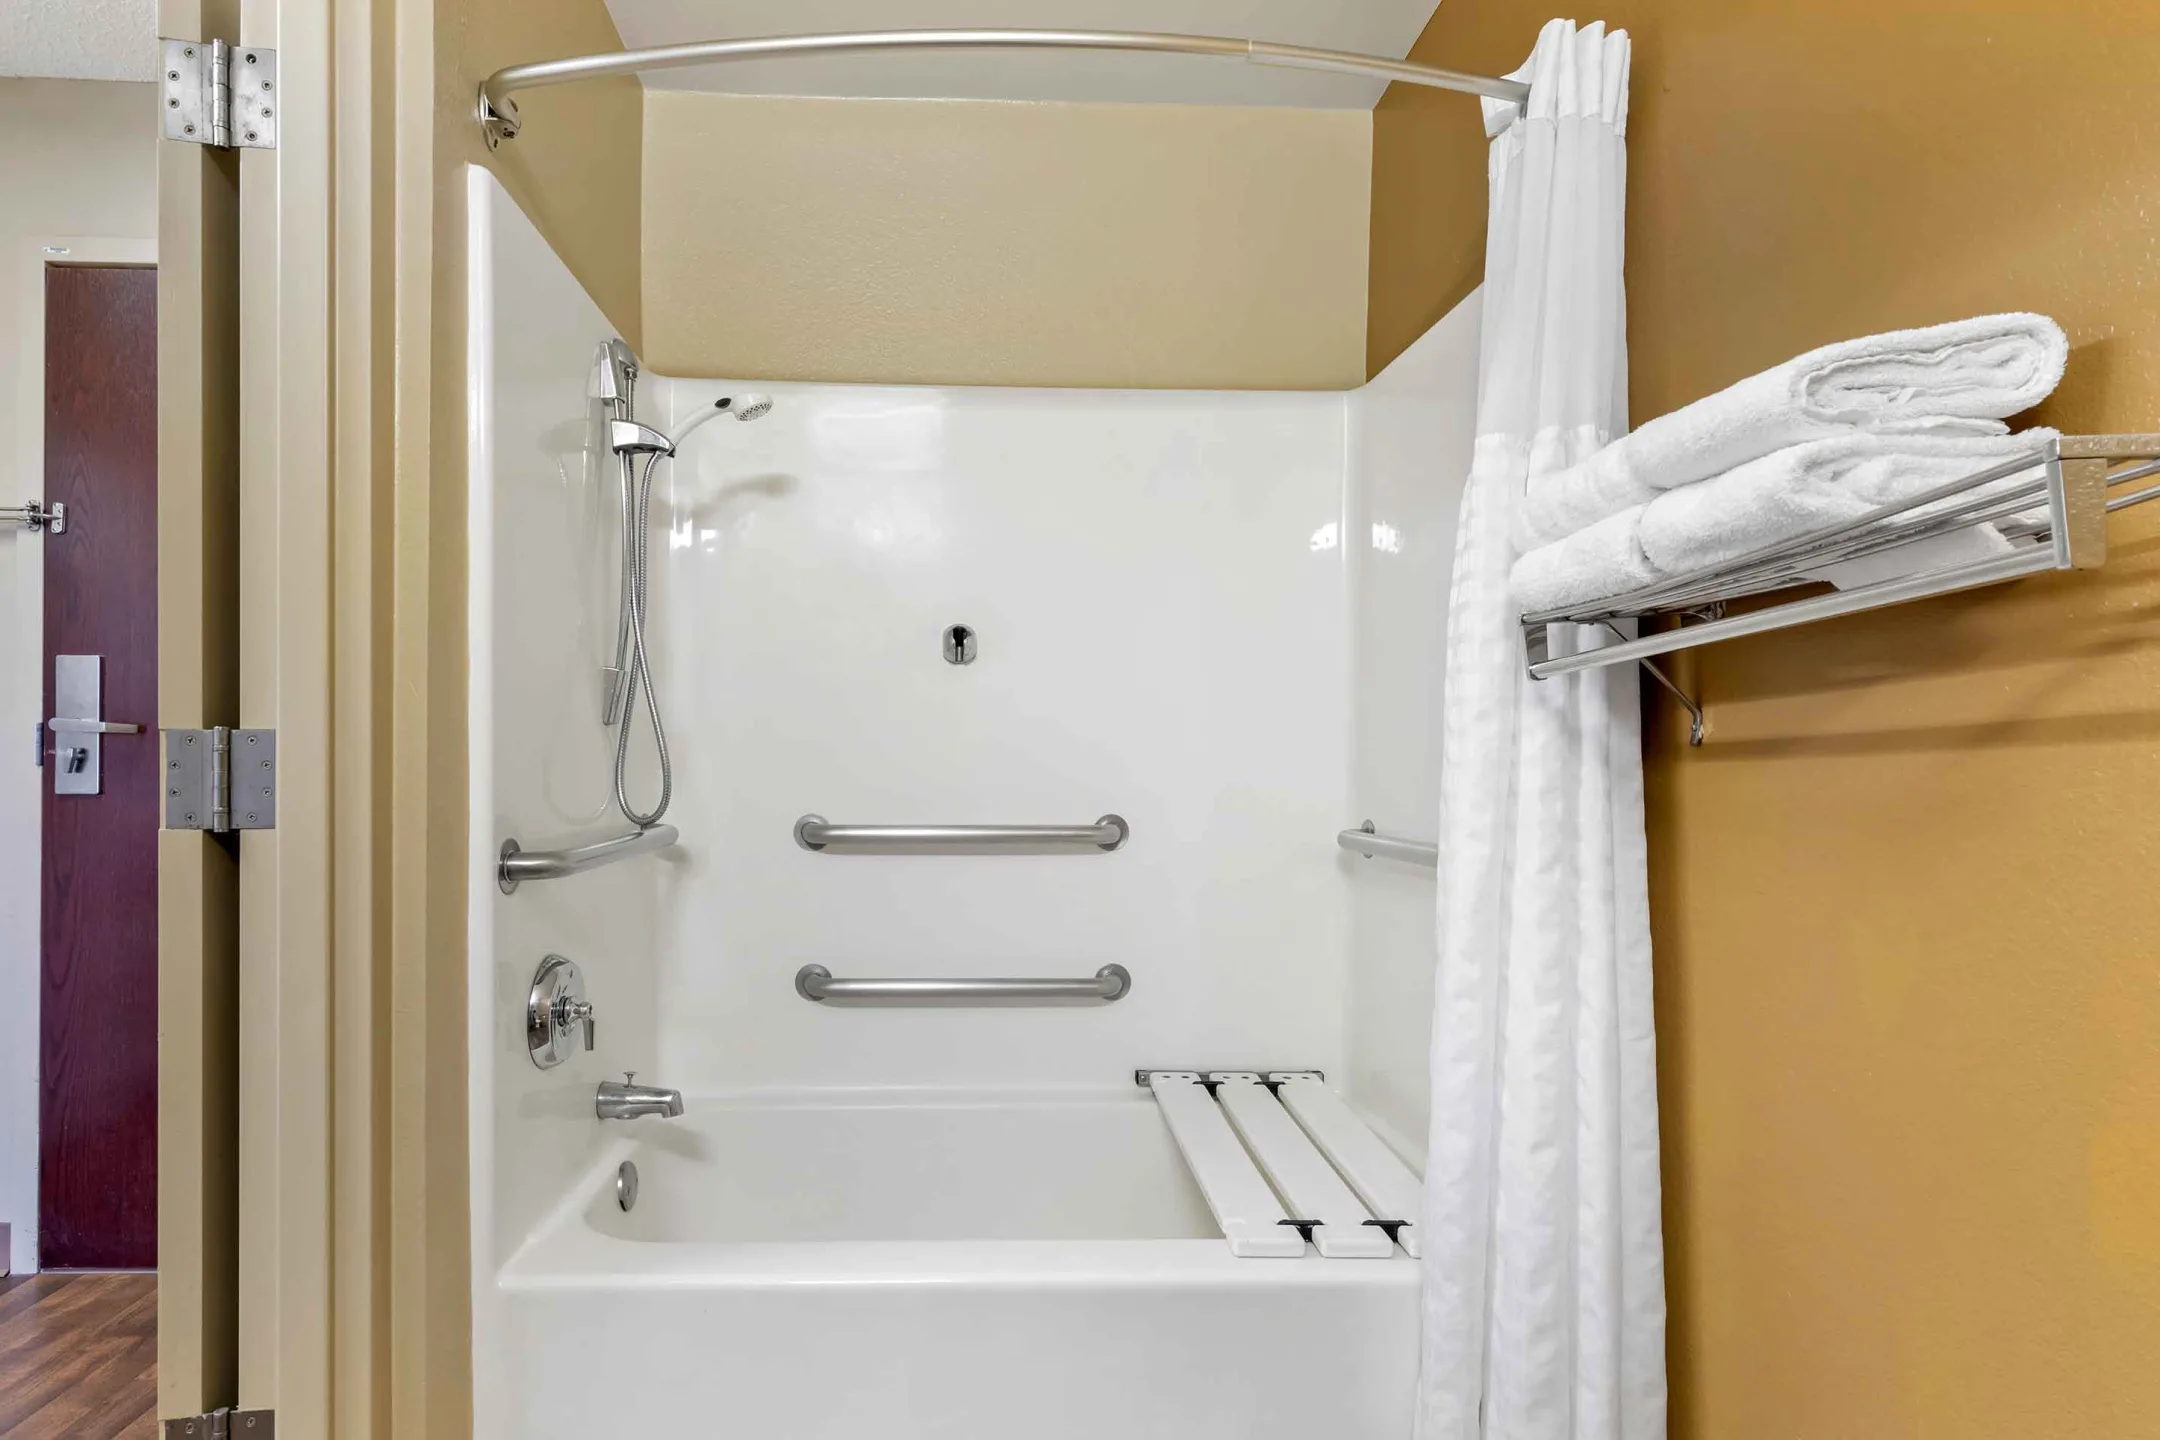 Bathroom - Furnished Studio - Clearwater - Carillon Park - Clearwater, FL